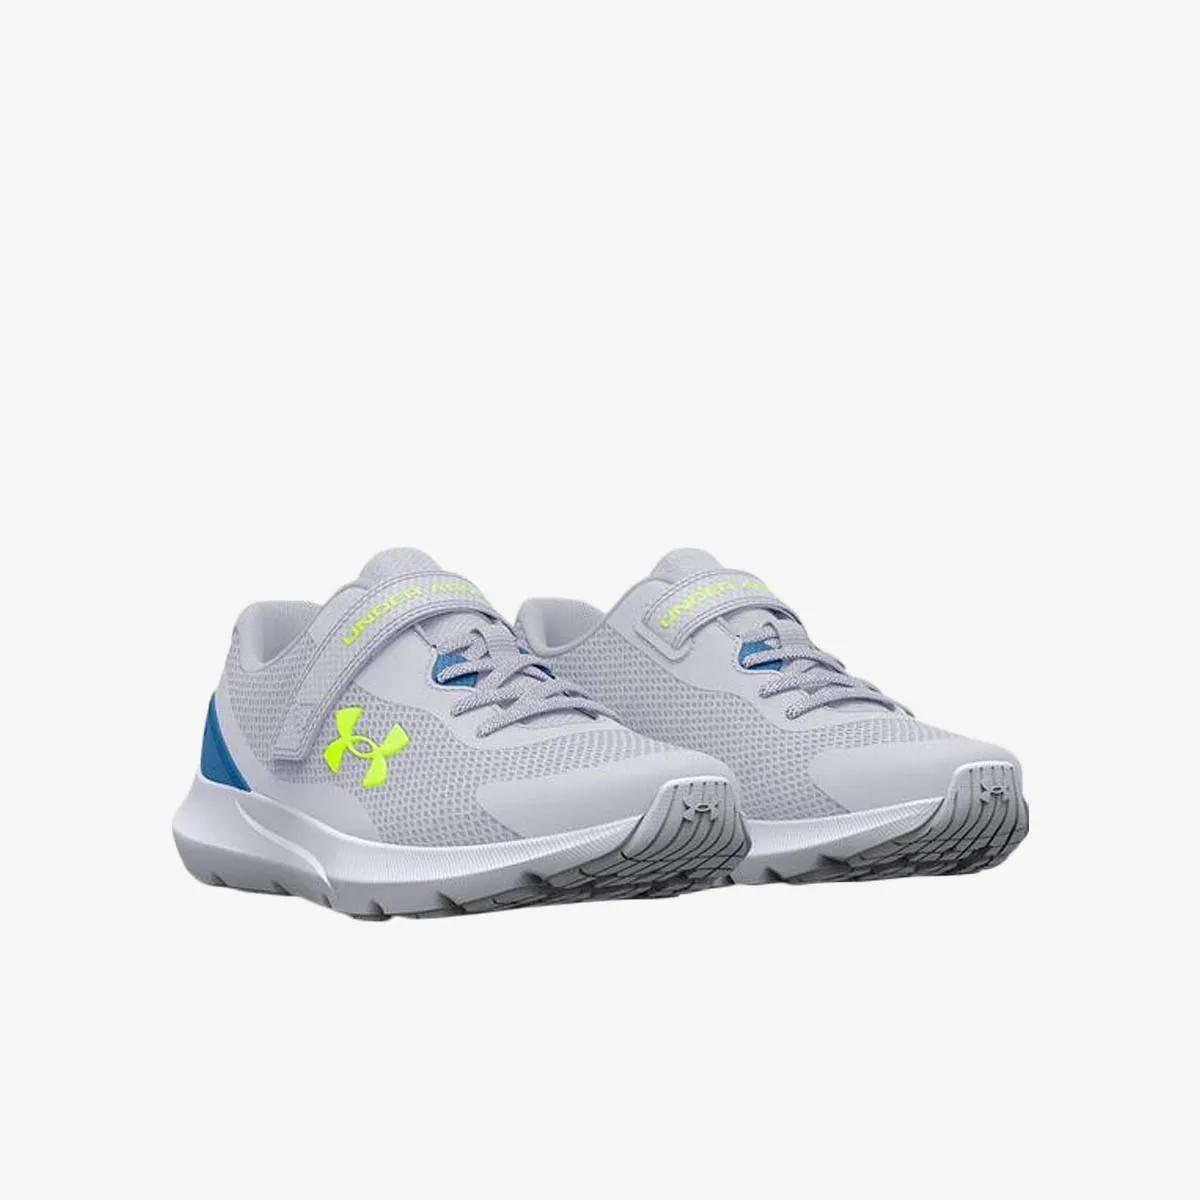 Under Armour Pre-School UA Surge 3 Running Shoes 